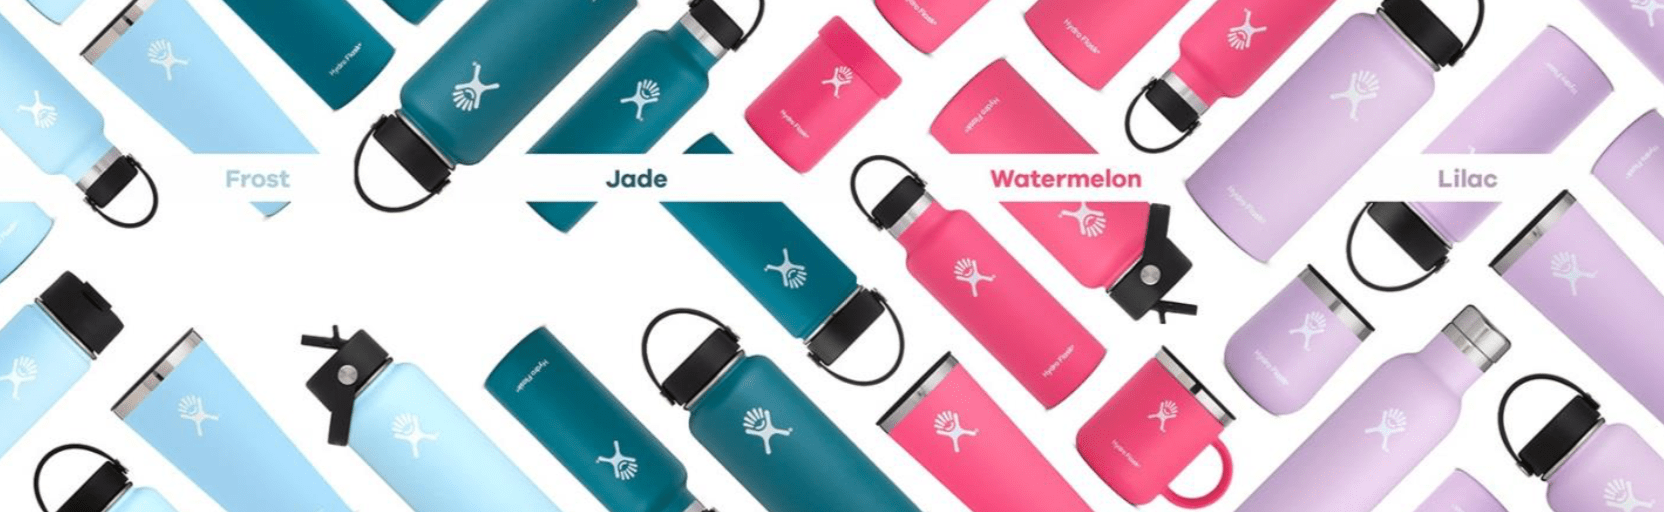 Hydro Flask New Colors